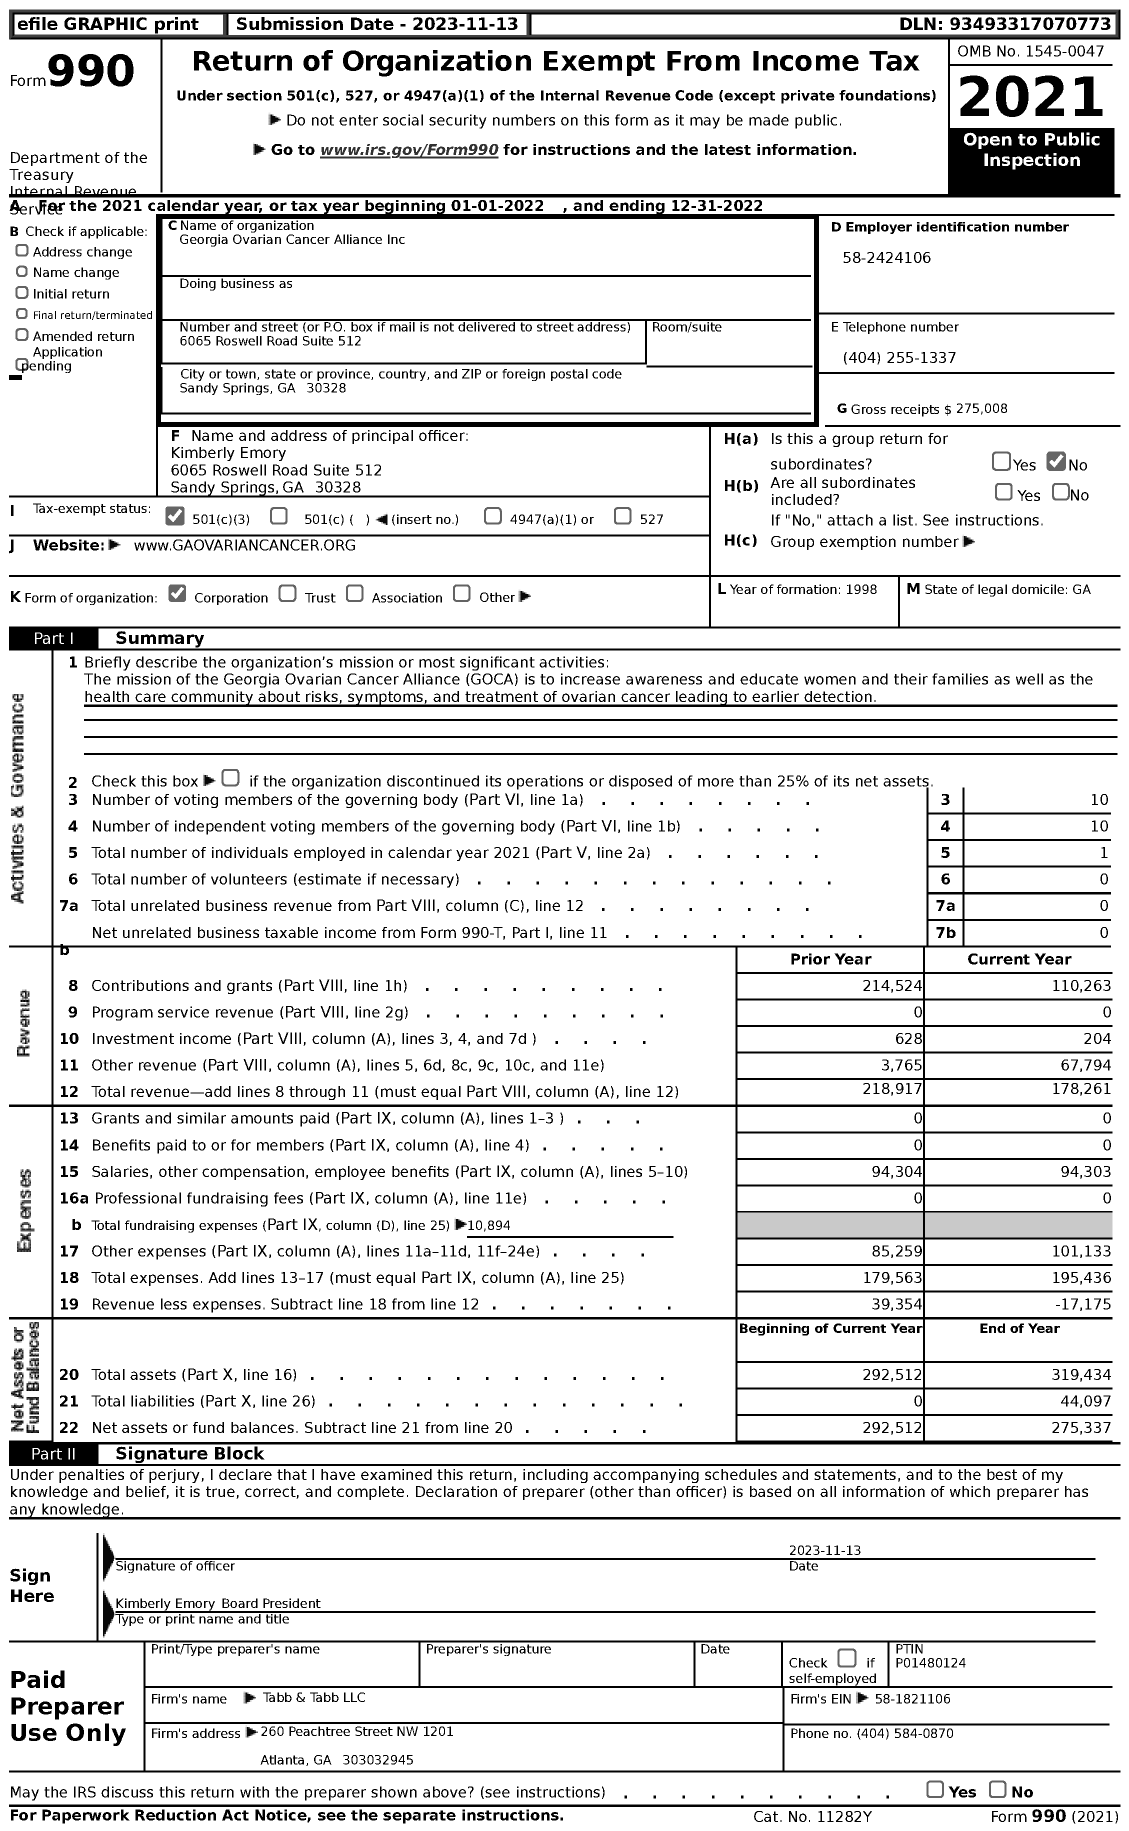 Image of first page of 2022 Form 990 for Georgia Ovarian Cancer Allianceinc